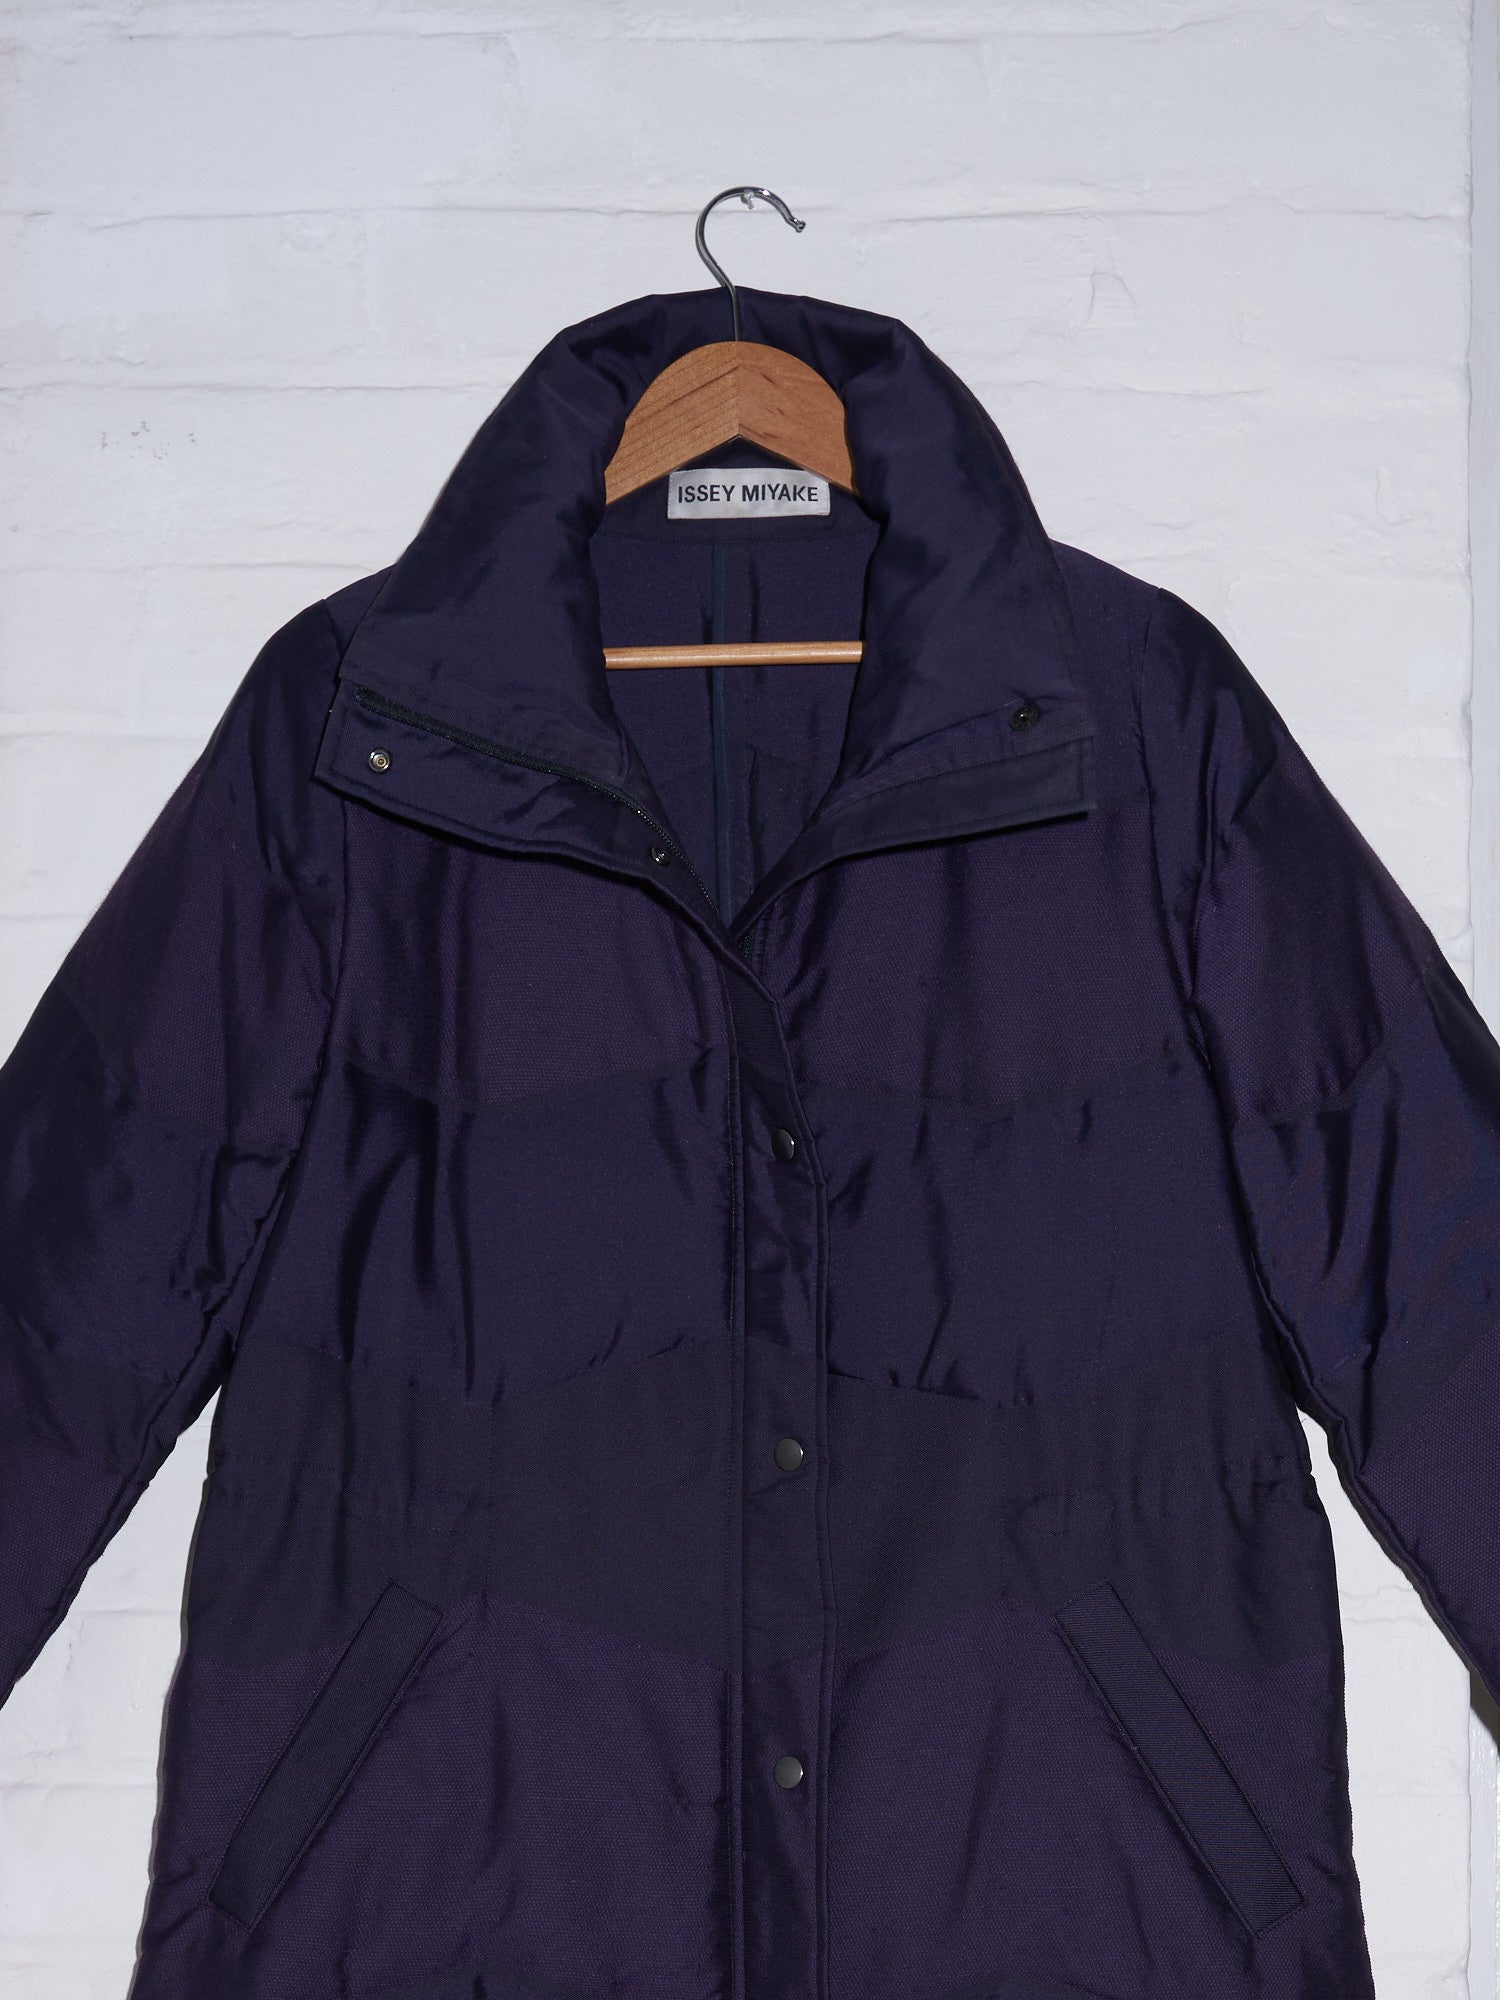 Issey Miyake panelled purple polyester high neck down puffer coat - size 3 L M